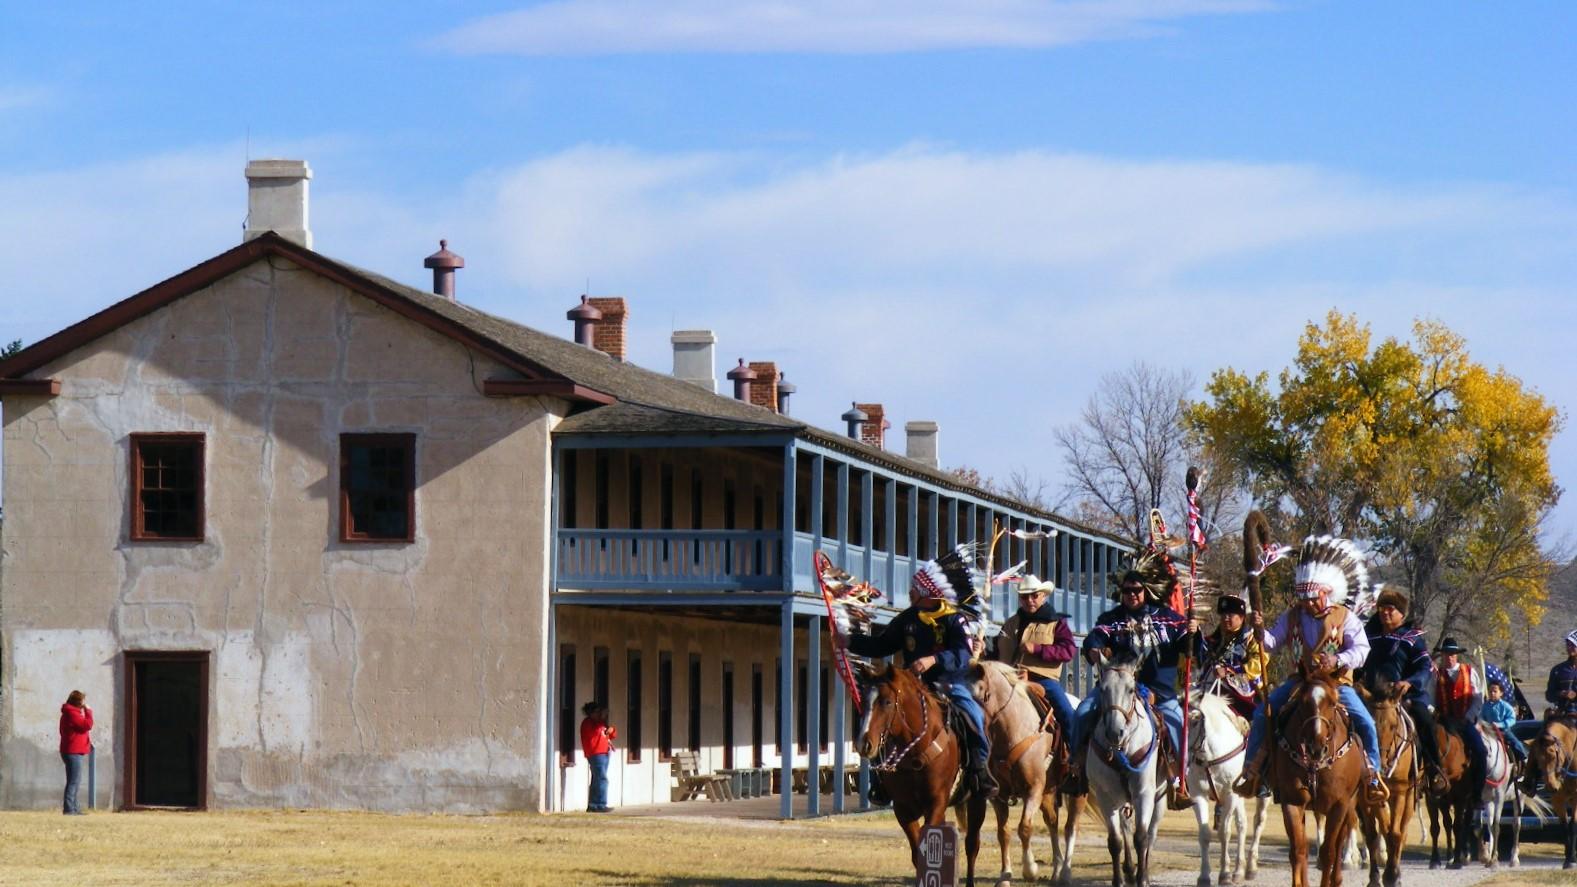 Native American people riding horses - some in traditional regalia - in front the Cavalry Barracks.